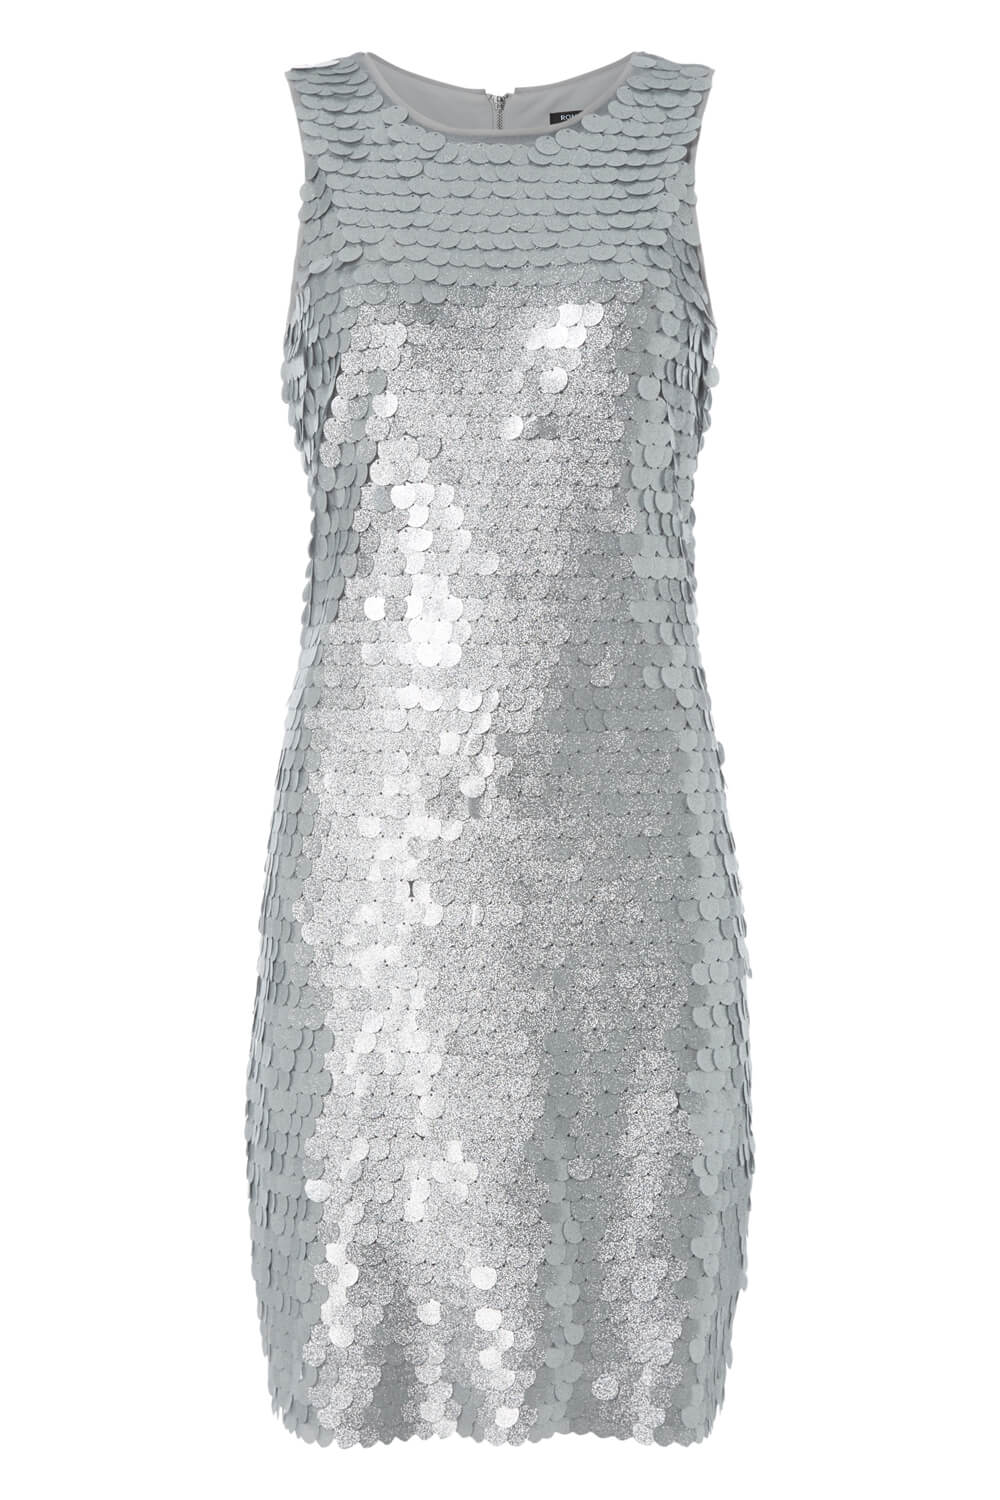 Silver Sequin Shift Dress, Image 2 of 2